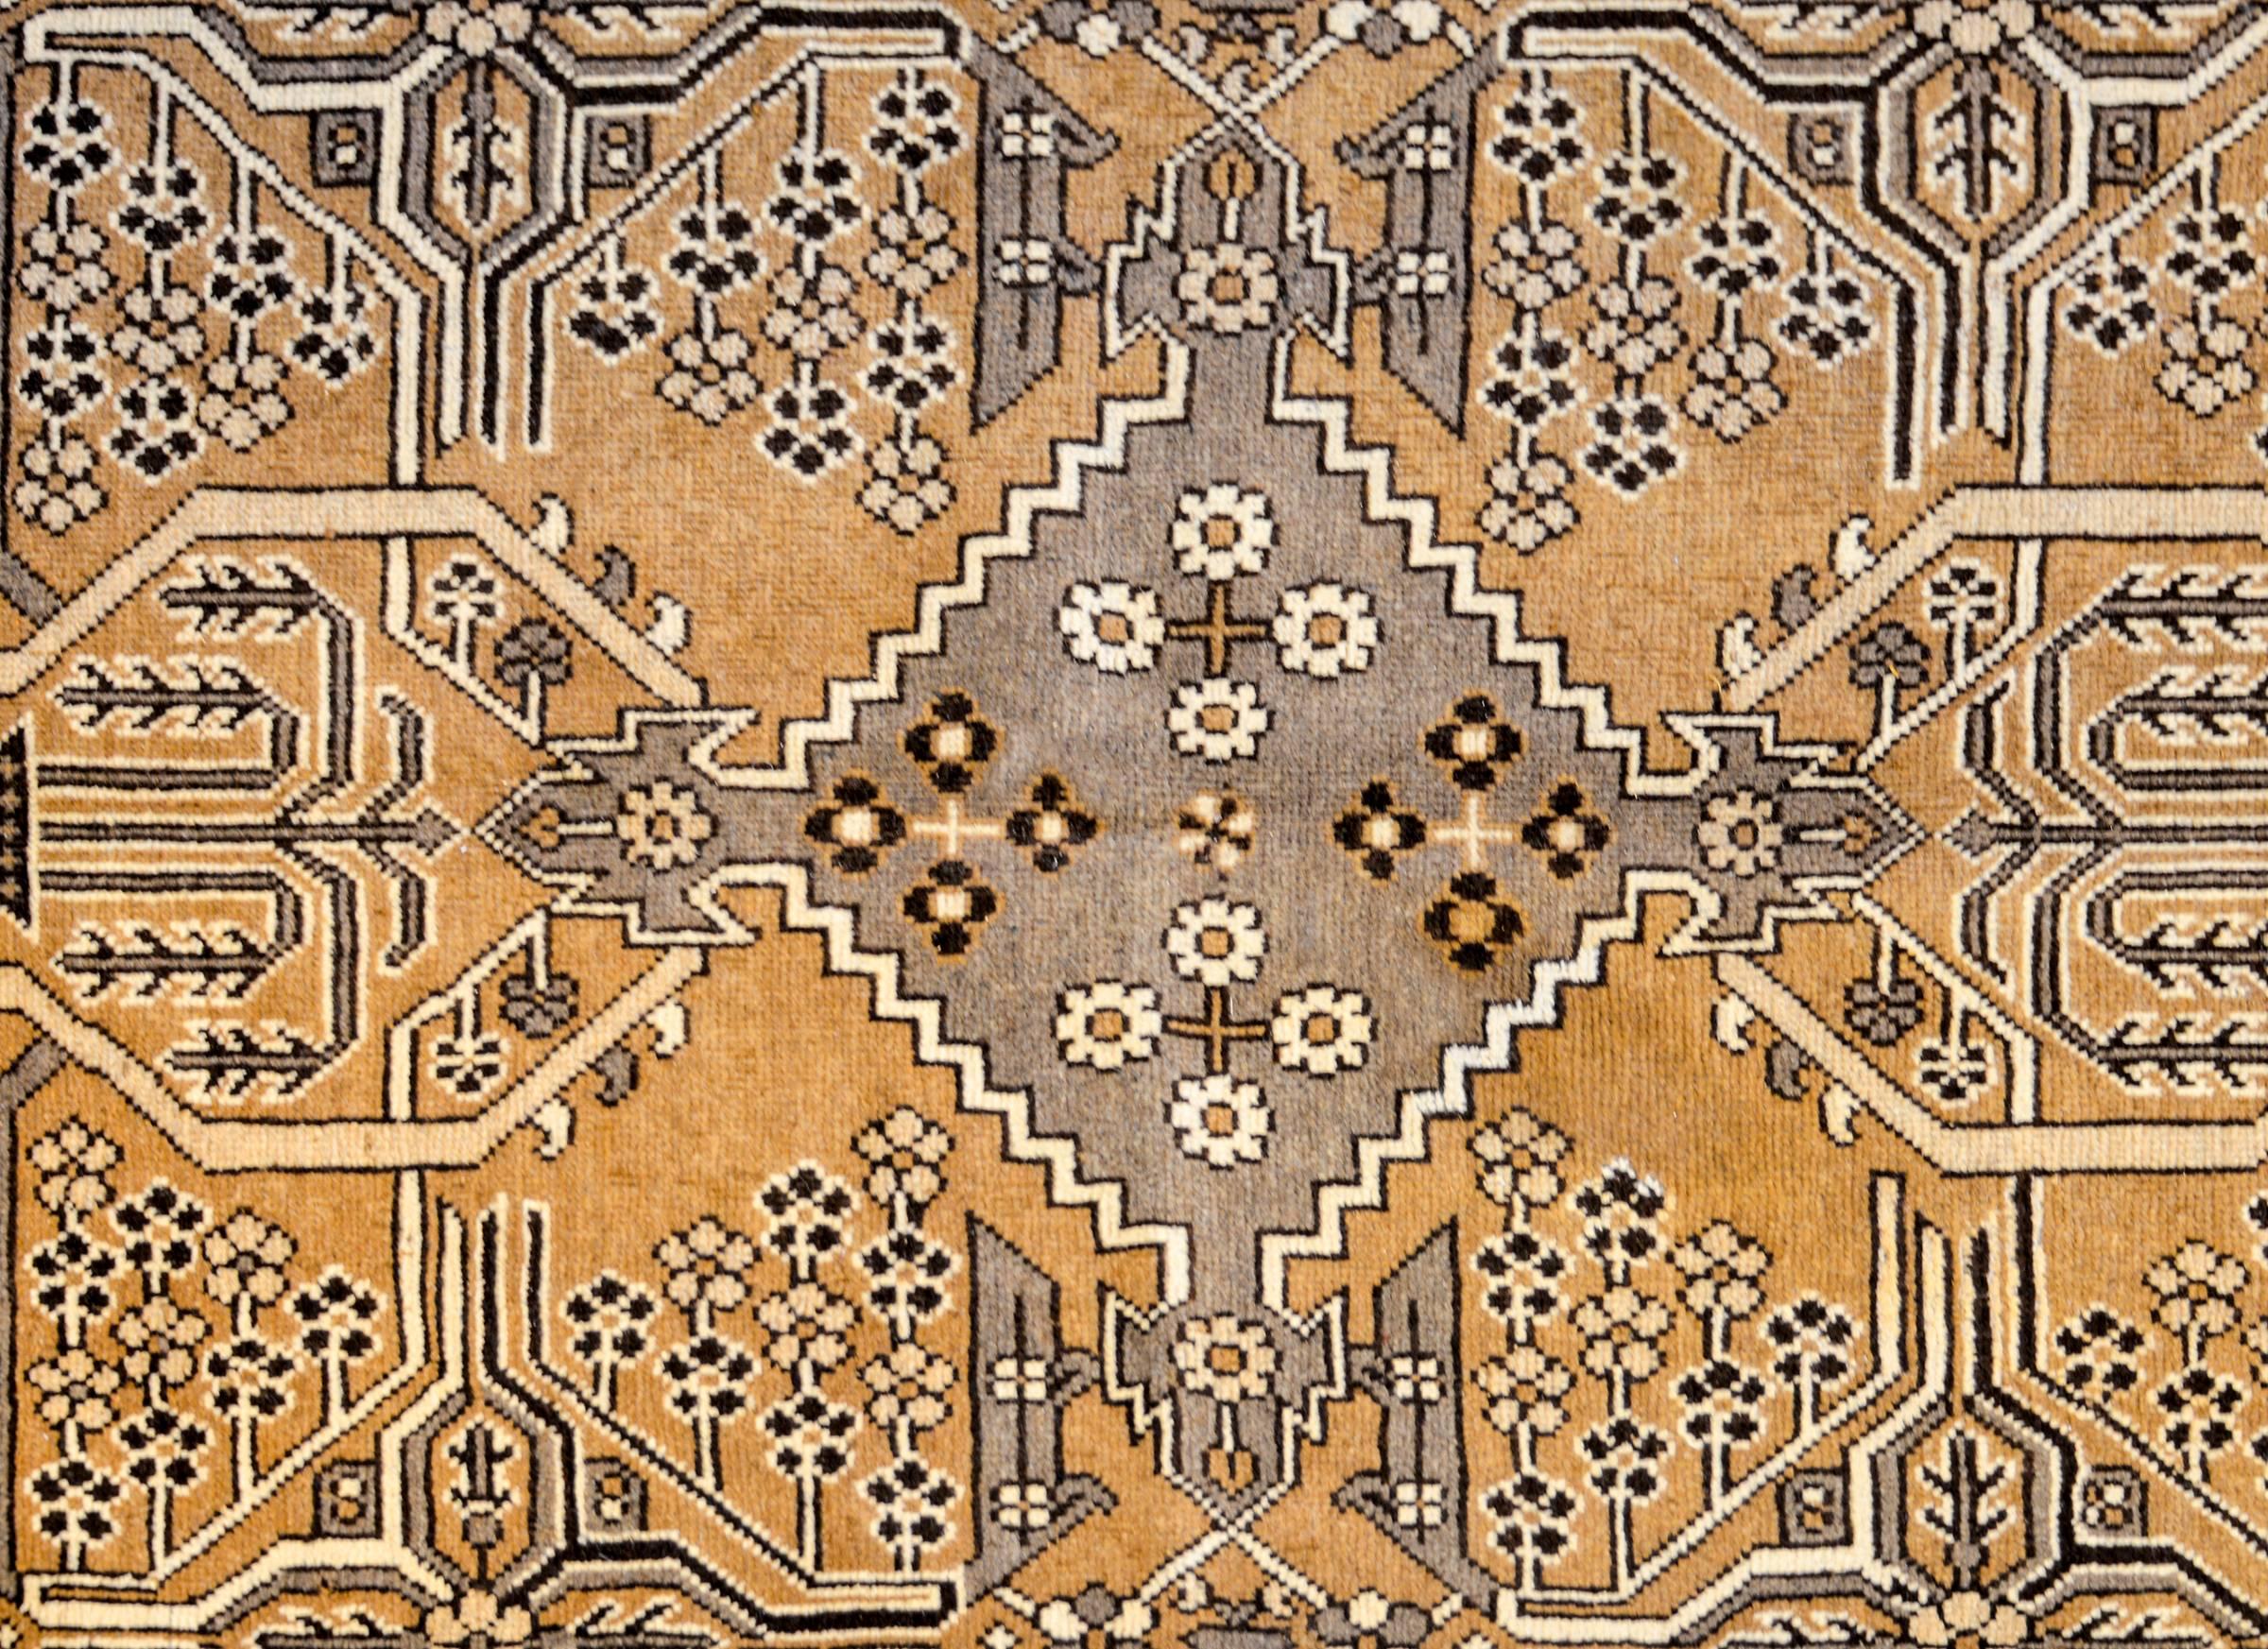 A wonderful early 20th century Persian Bakhtiari rug with a wonderful all-natural, undyed, wool color palette. The central field is mirrored, depicting multiple geometric patterns within diamond shapes, and a couple willow trees with other flowers